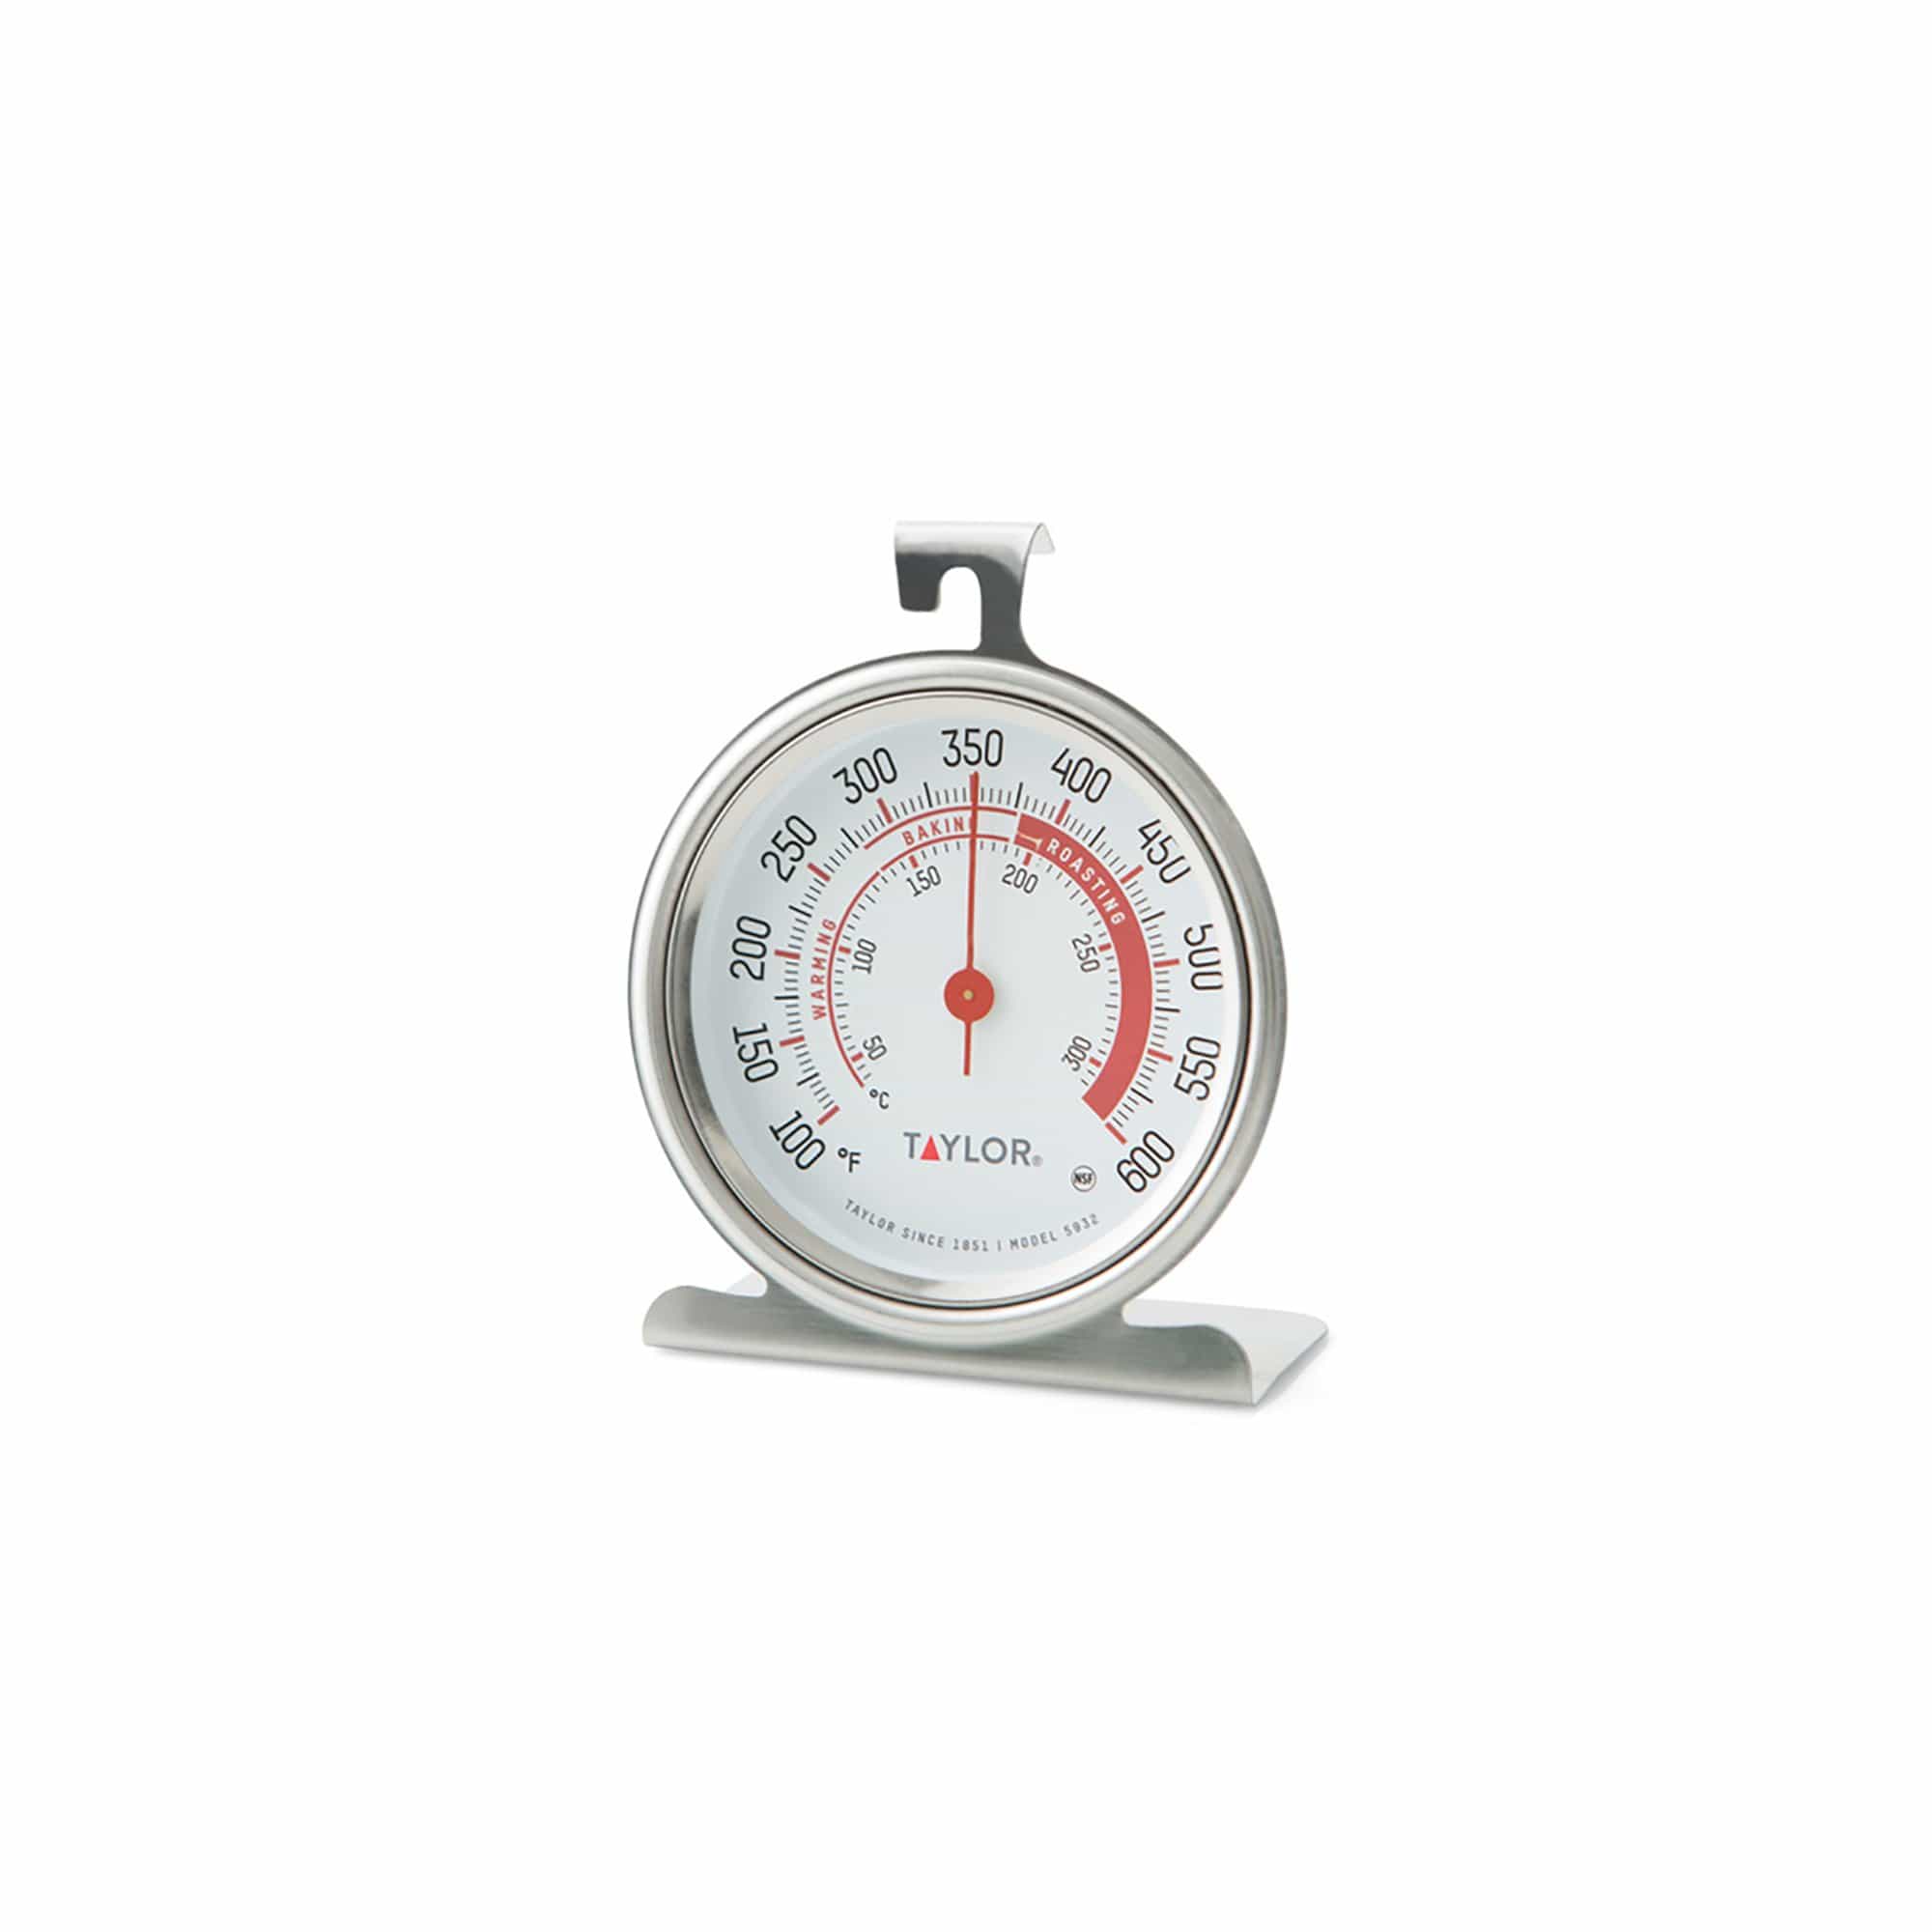 Analog Dial Oven Thermometer, 5932